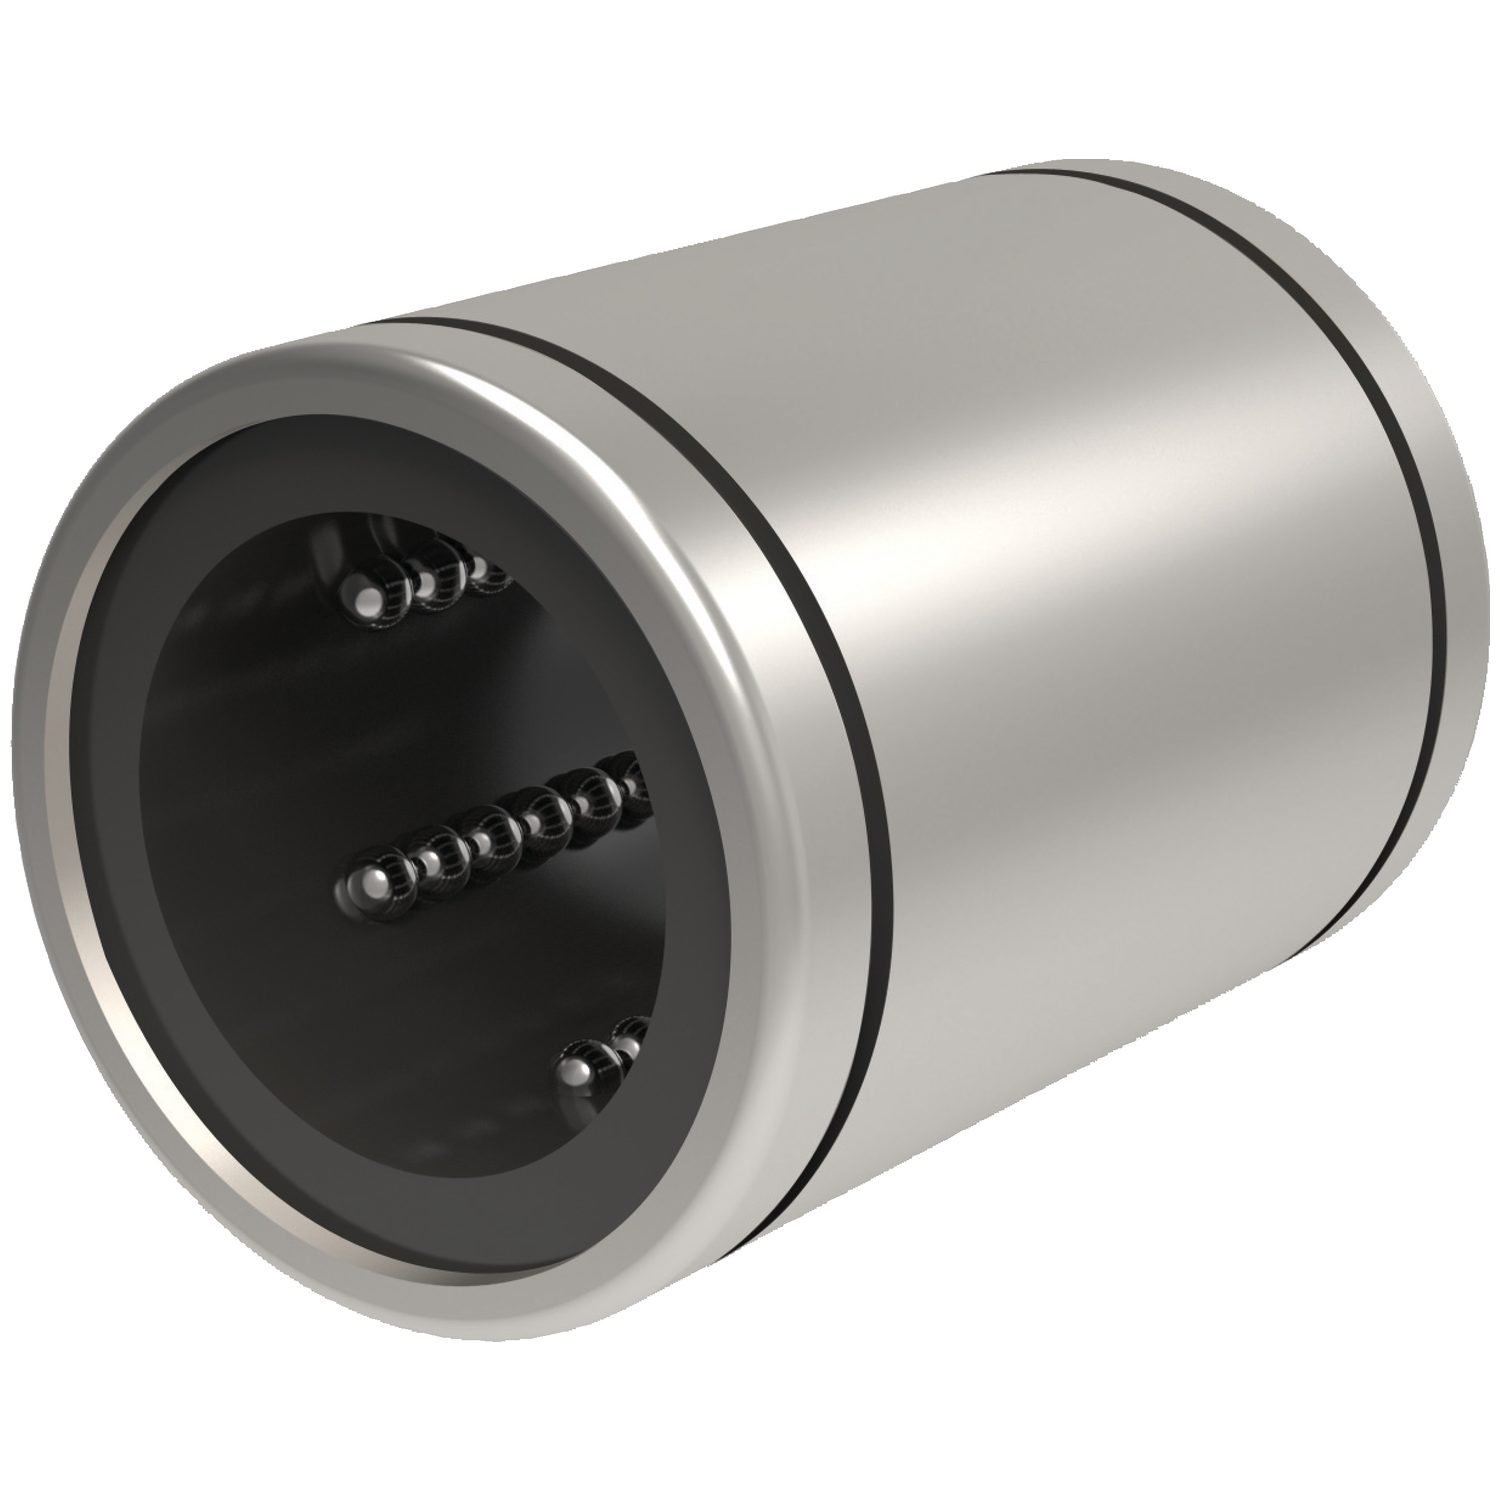 Stainless Linear Bearings Stainless steel body and balls (AISI 440C) with either a resin (POM) or stainless steel (AISI 316) retainer. Supplied with nitrile rubber end seals. Flanged and long versions available.